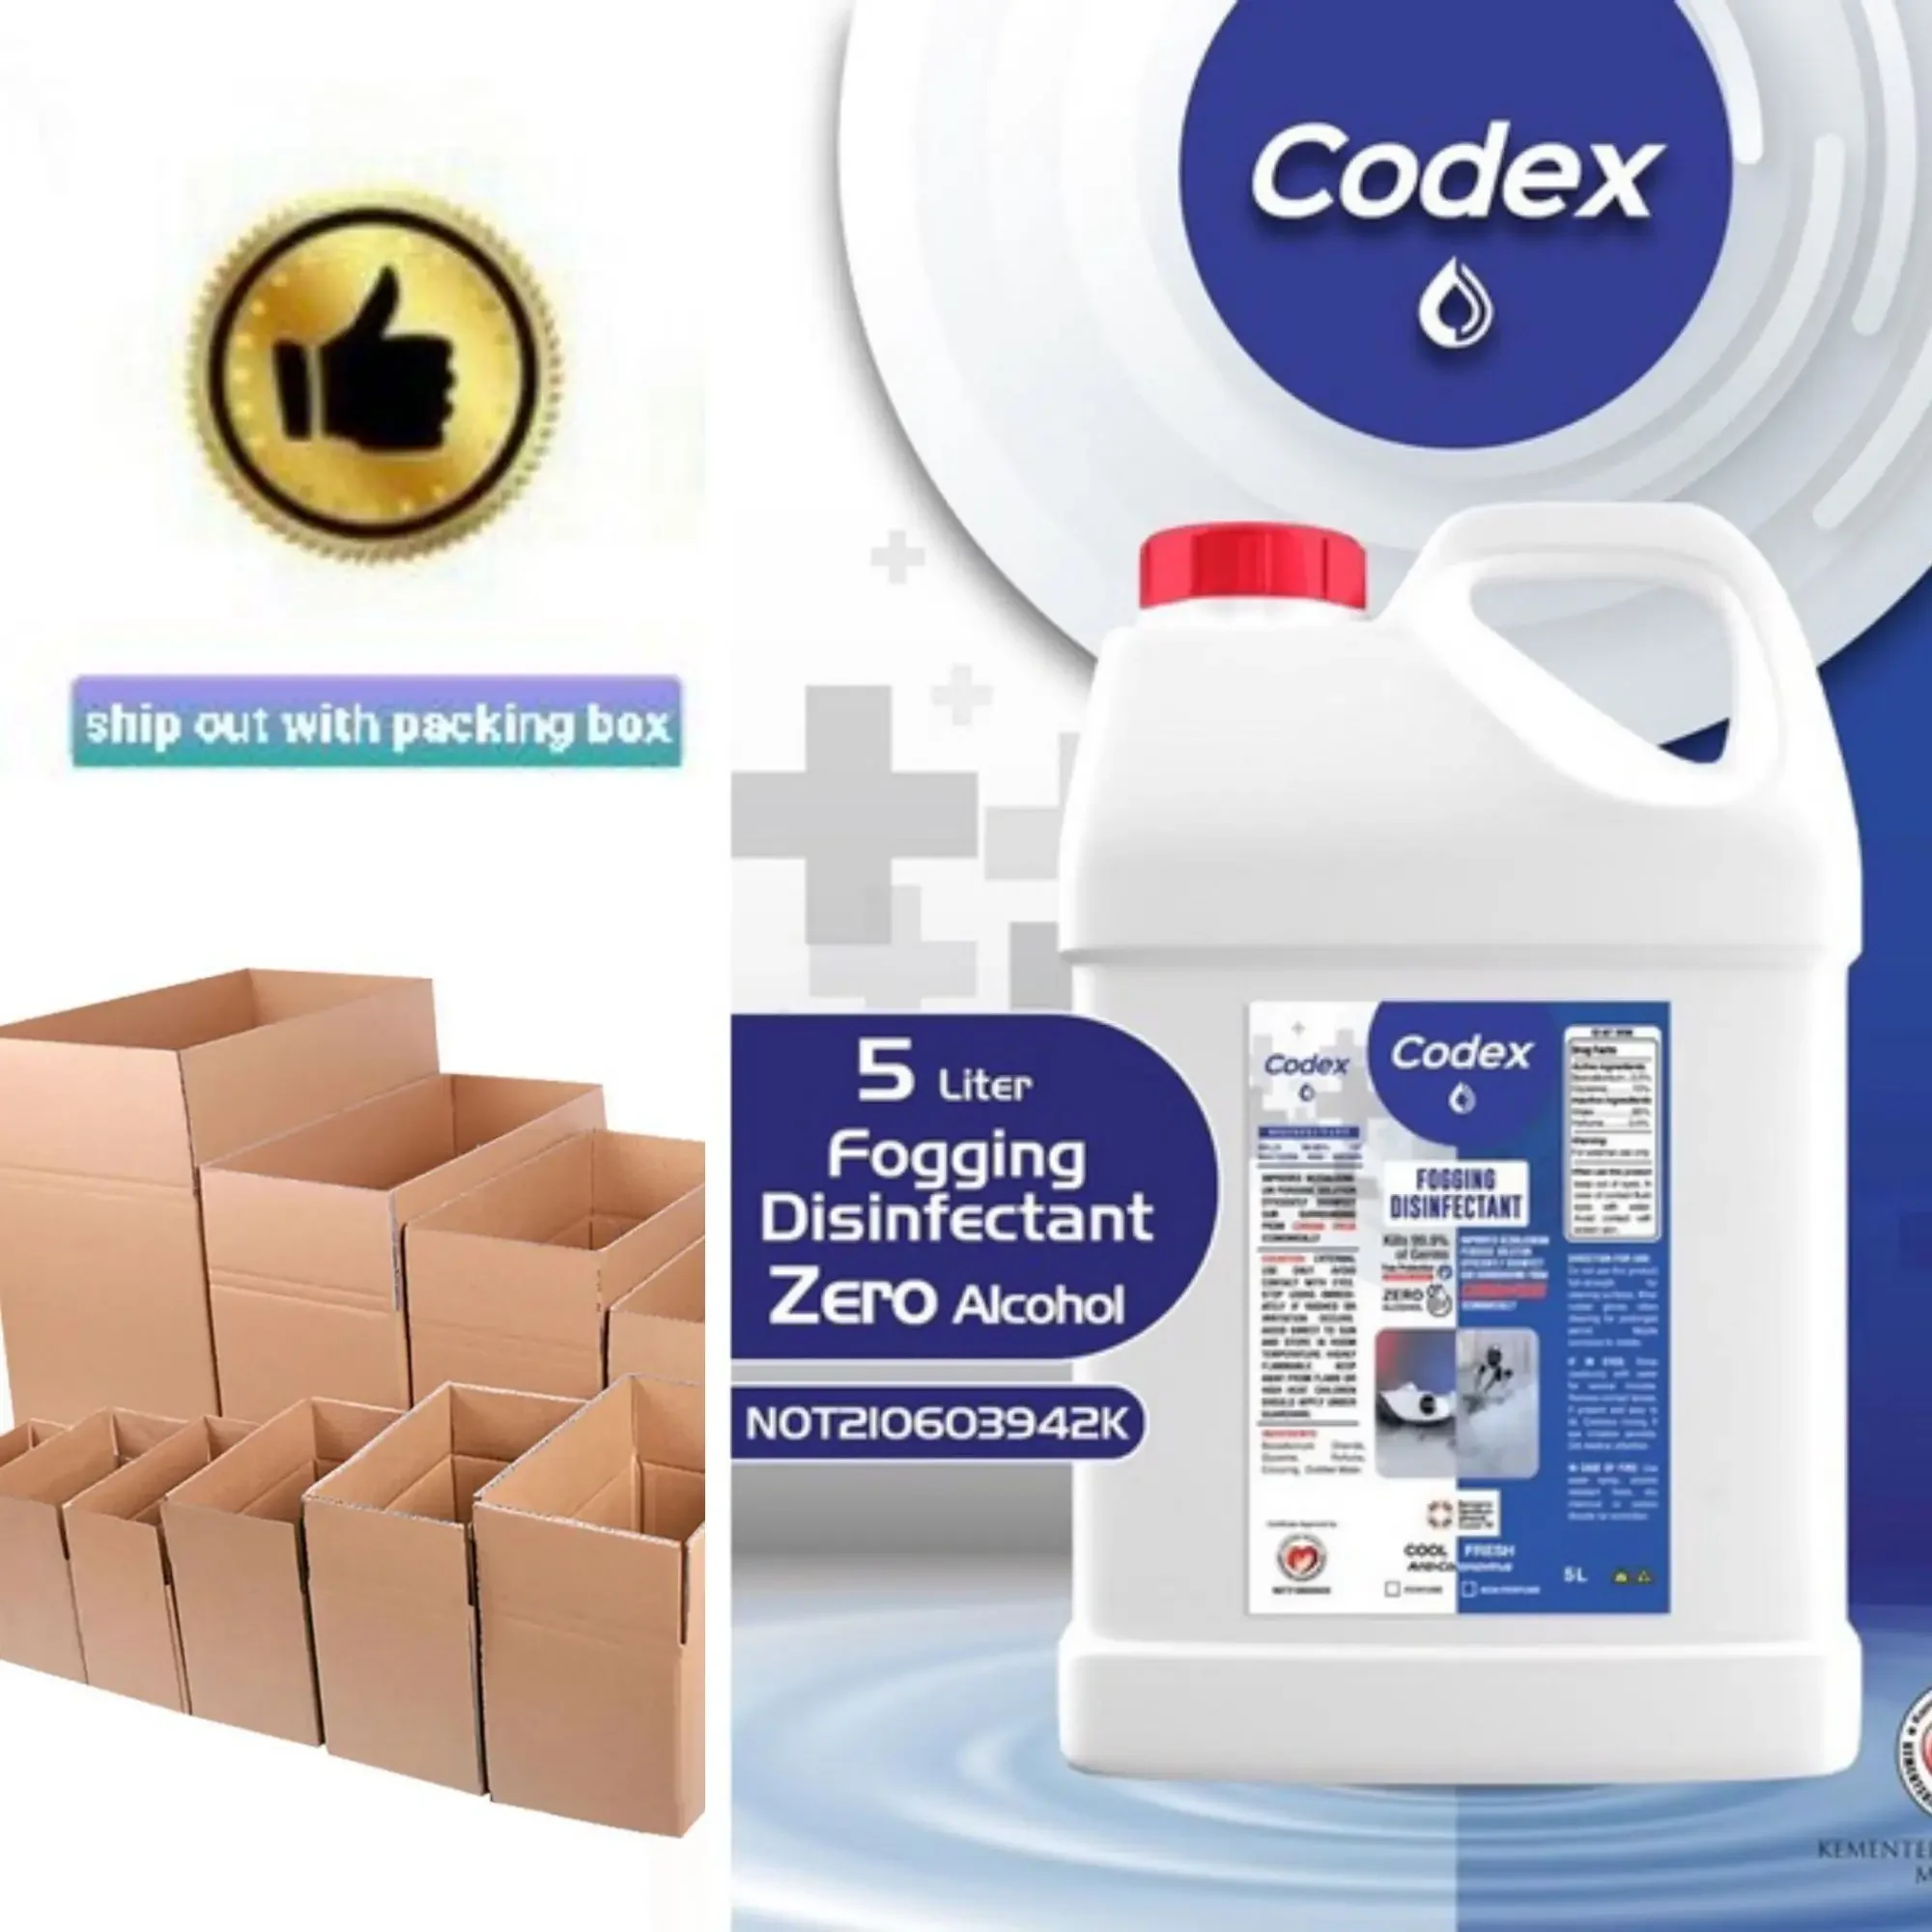 [ KKM Approved ]Codex Nano Mist Sanitizer 5L Liquid Disinfectant Sanitizer Non-Alcohol fogging disinfectant -Ready Stock - well packing with box - fast shipping